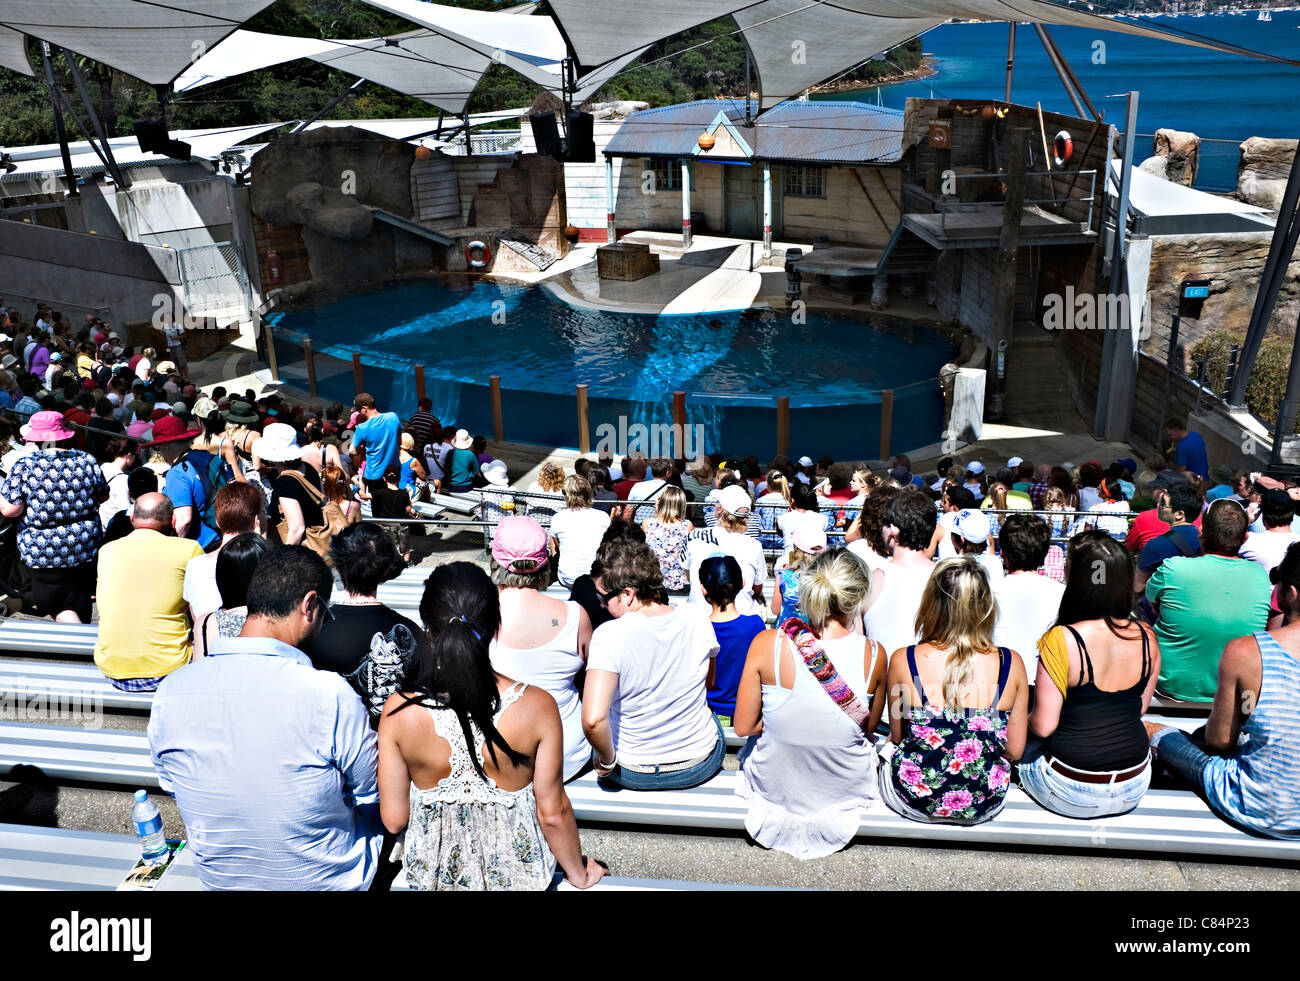 A Crowd of Visitors Await the Start of a Performance in the Seal Enclosure at Taronga Zoo Sydney New South Wales Australia Stock Photo